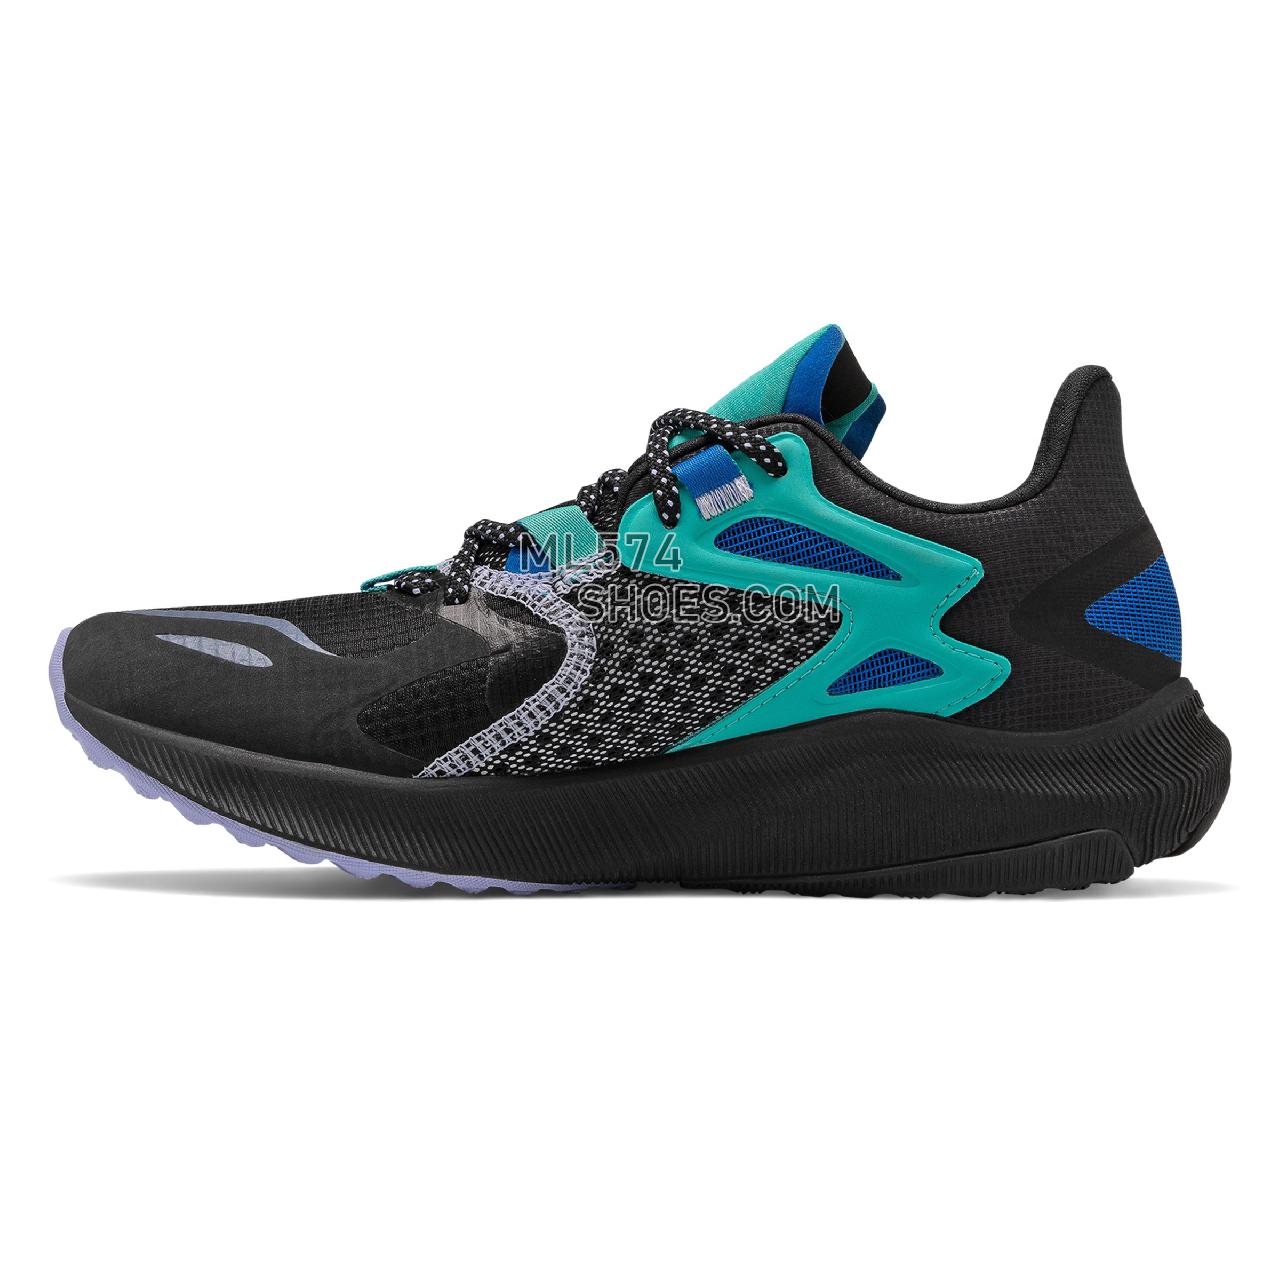 New Balance FuelCell Propel RMX - Women's Fuelcell Sleek And LightWeight - Black with Tidepool and Mystic Purple - WPRMXLB